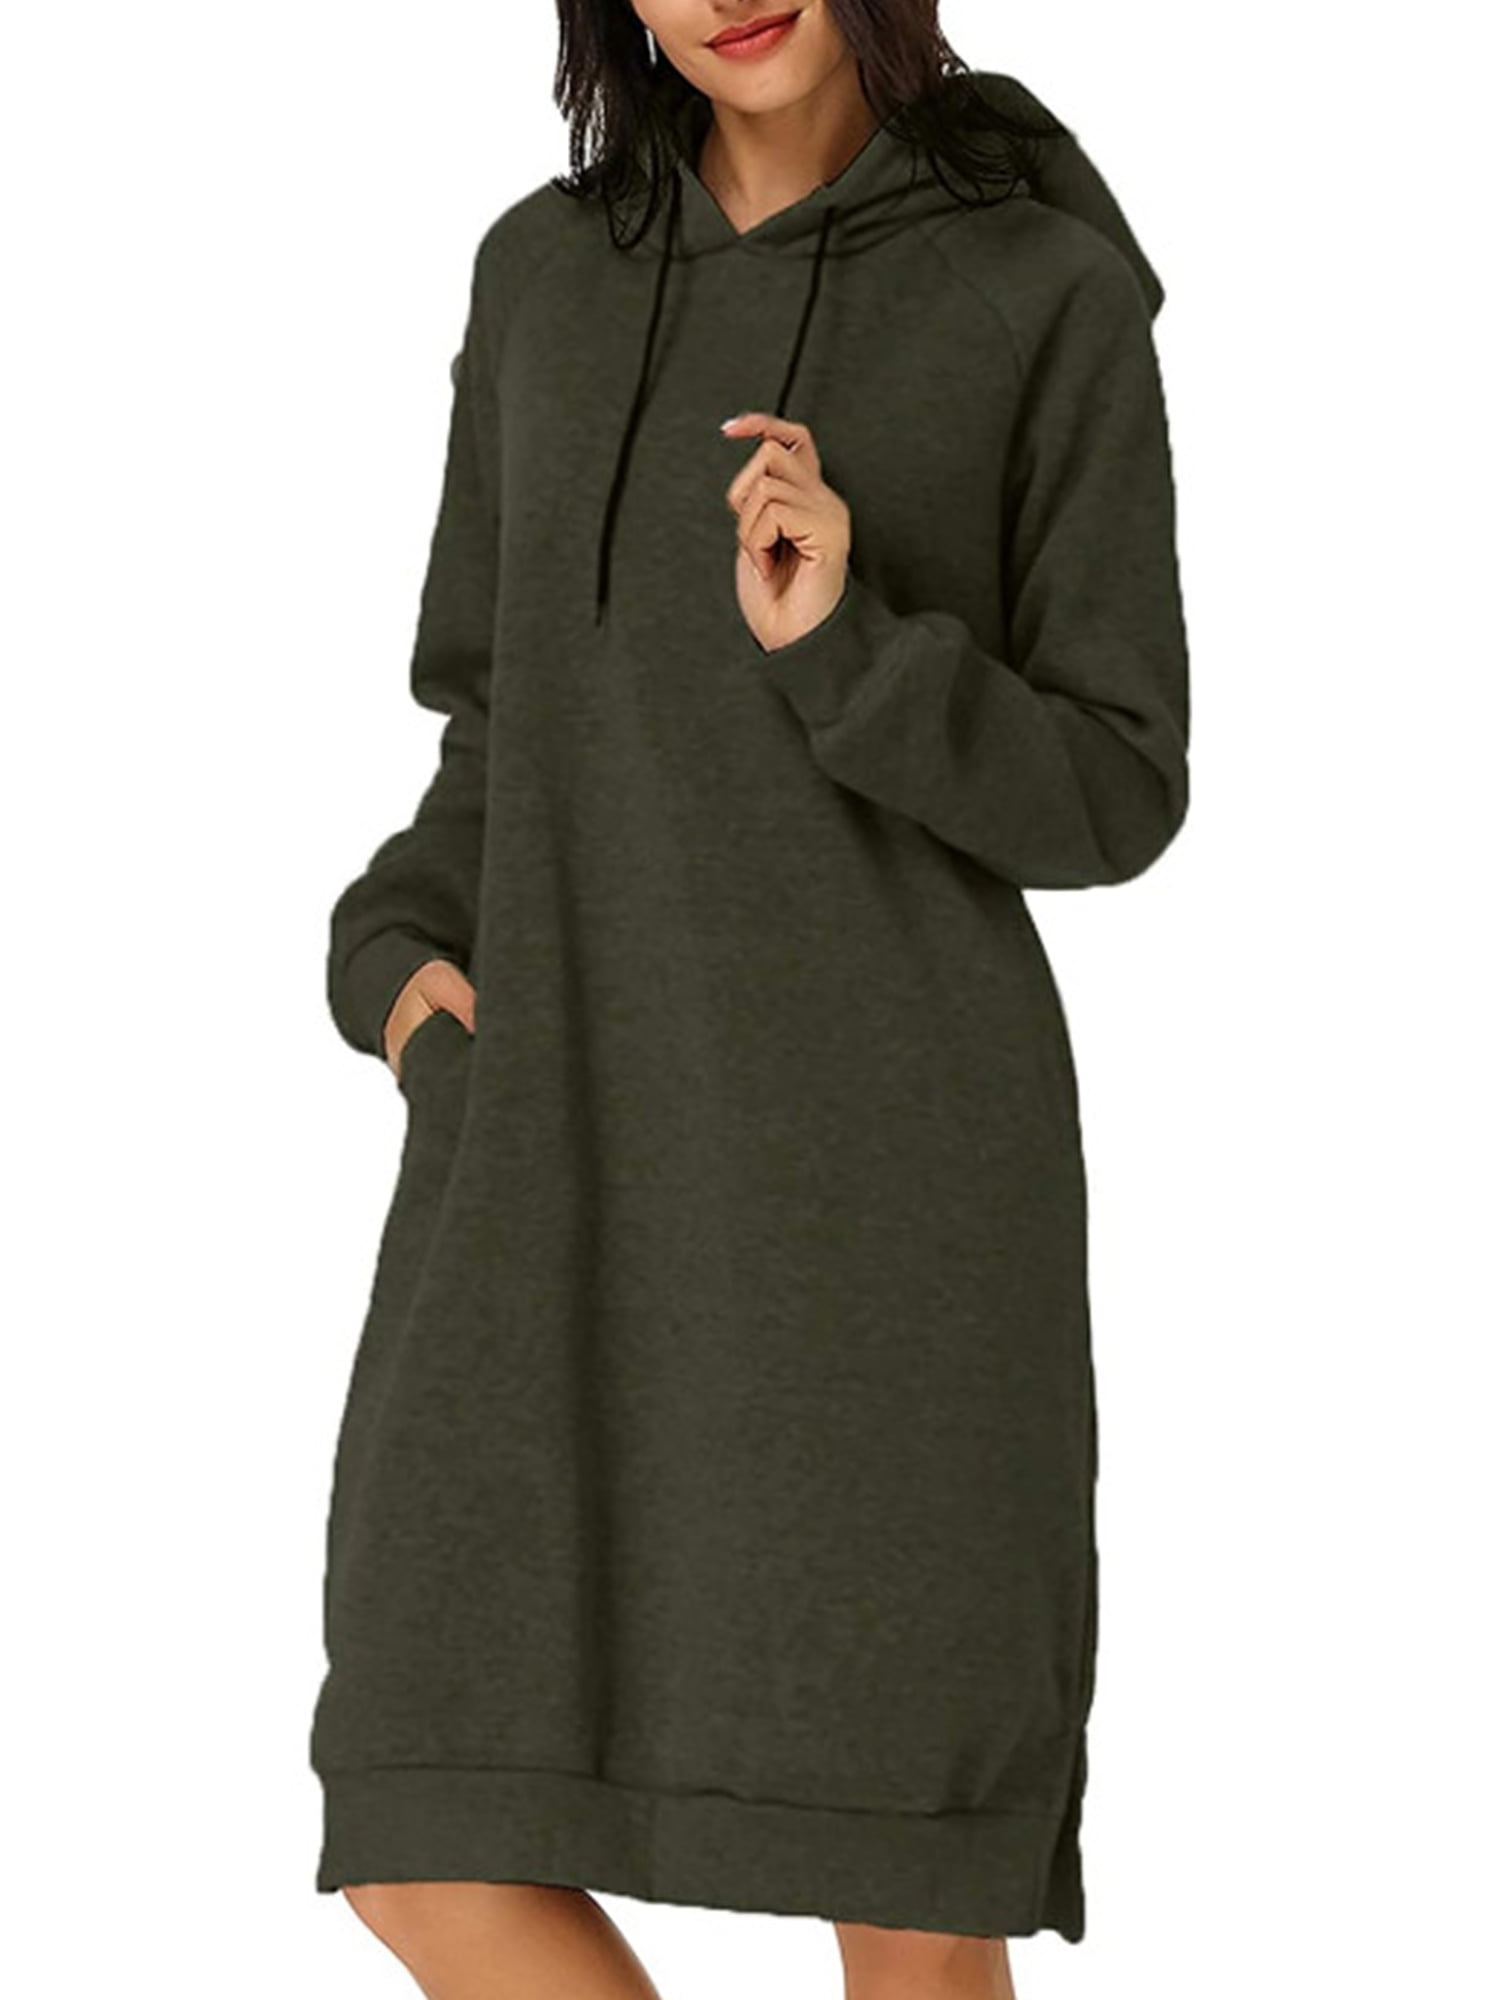 UKAP Long Sleeve Hooded Pockets Tunic Dress For Ladies Pullover